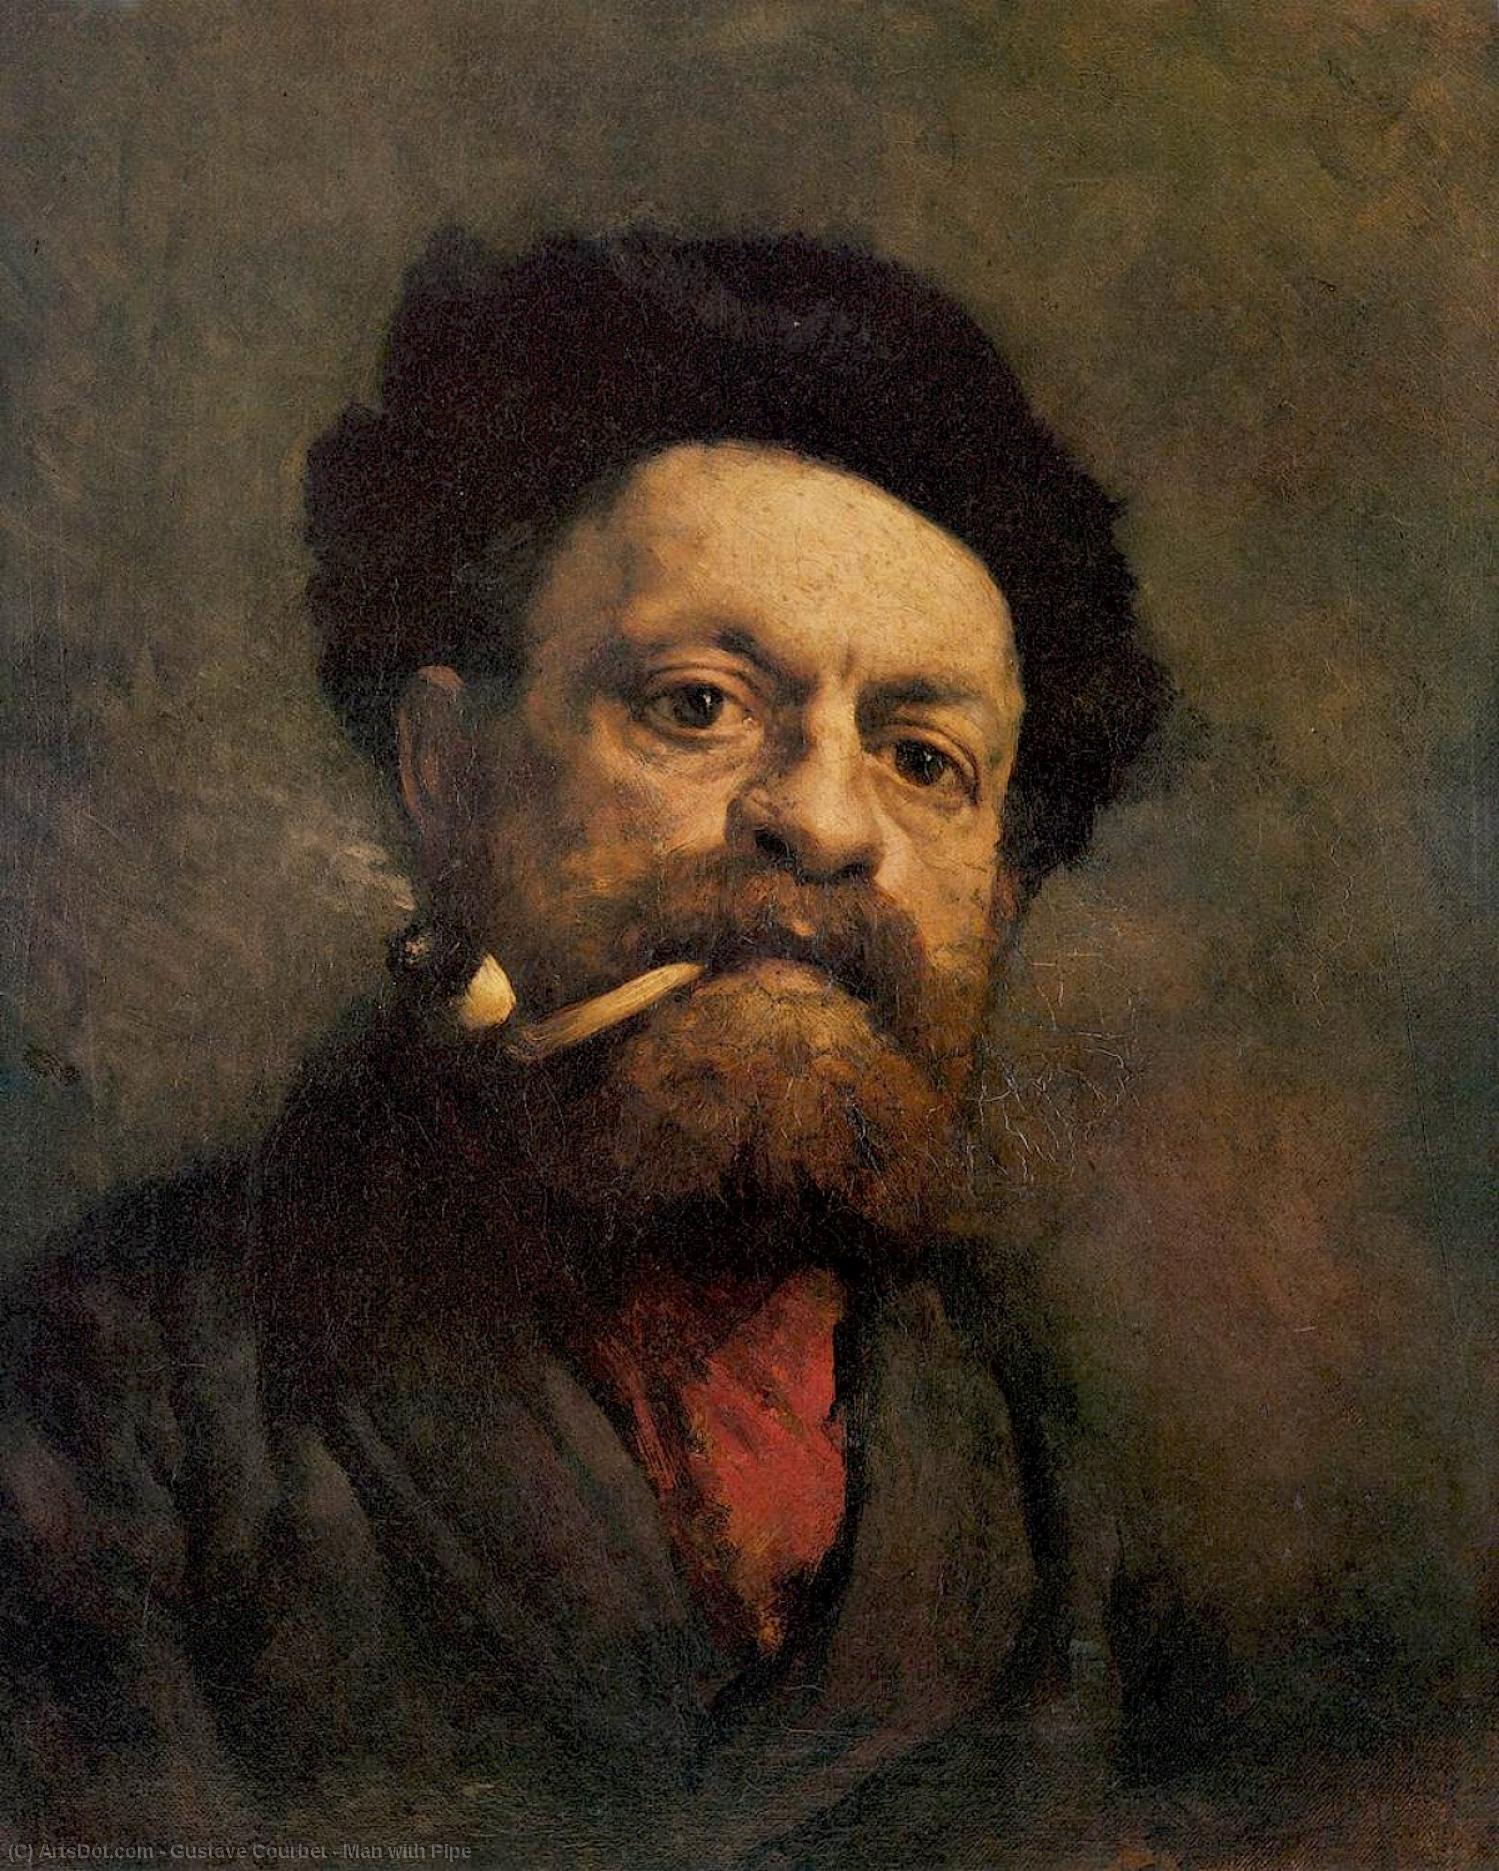 WikiOO.org - 백과 사전 - 회화, 삽화 Gustave Courbet - Man with Pipe